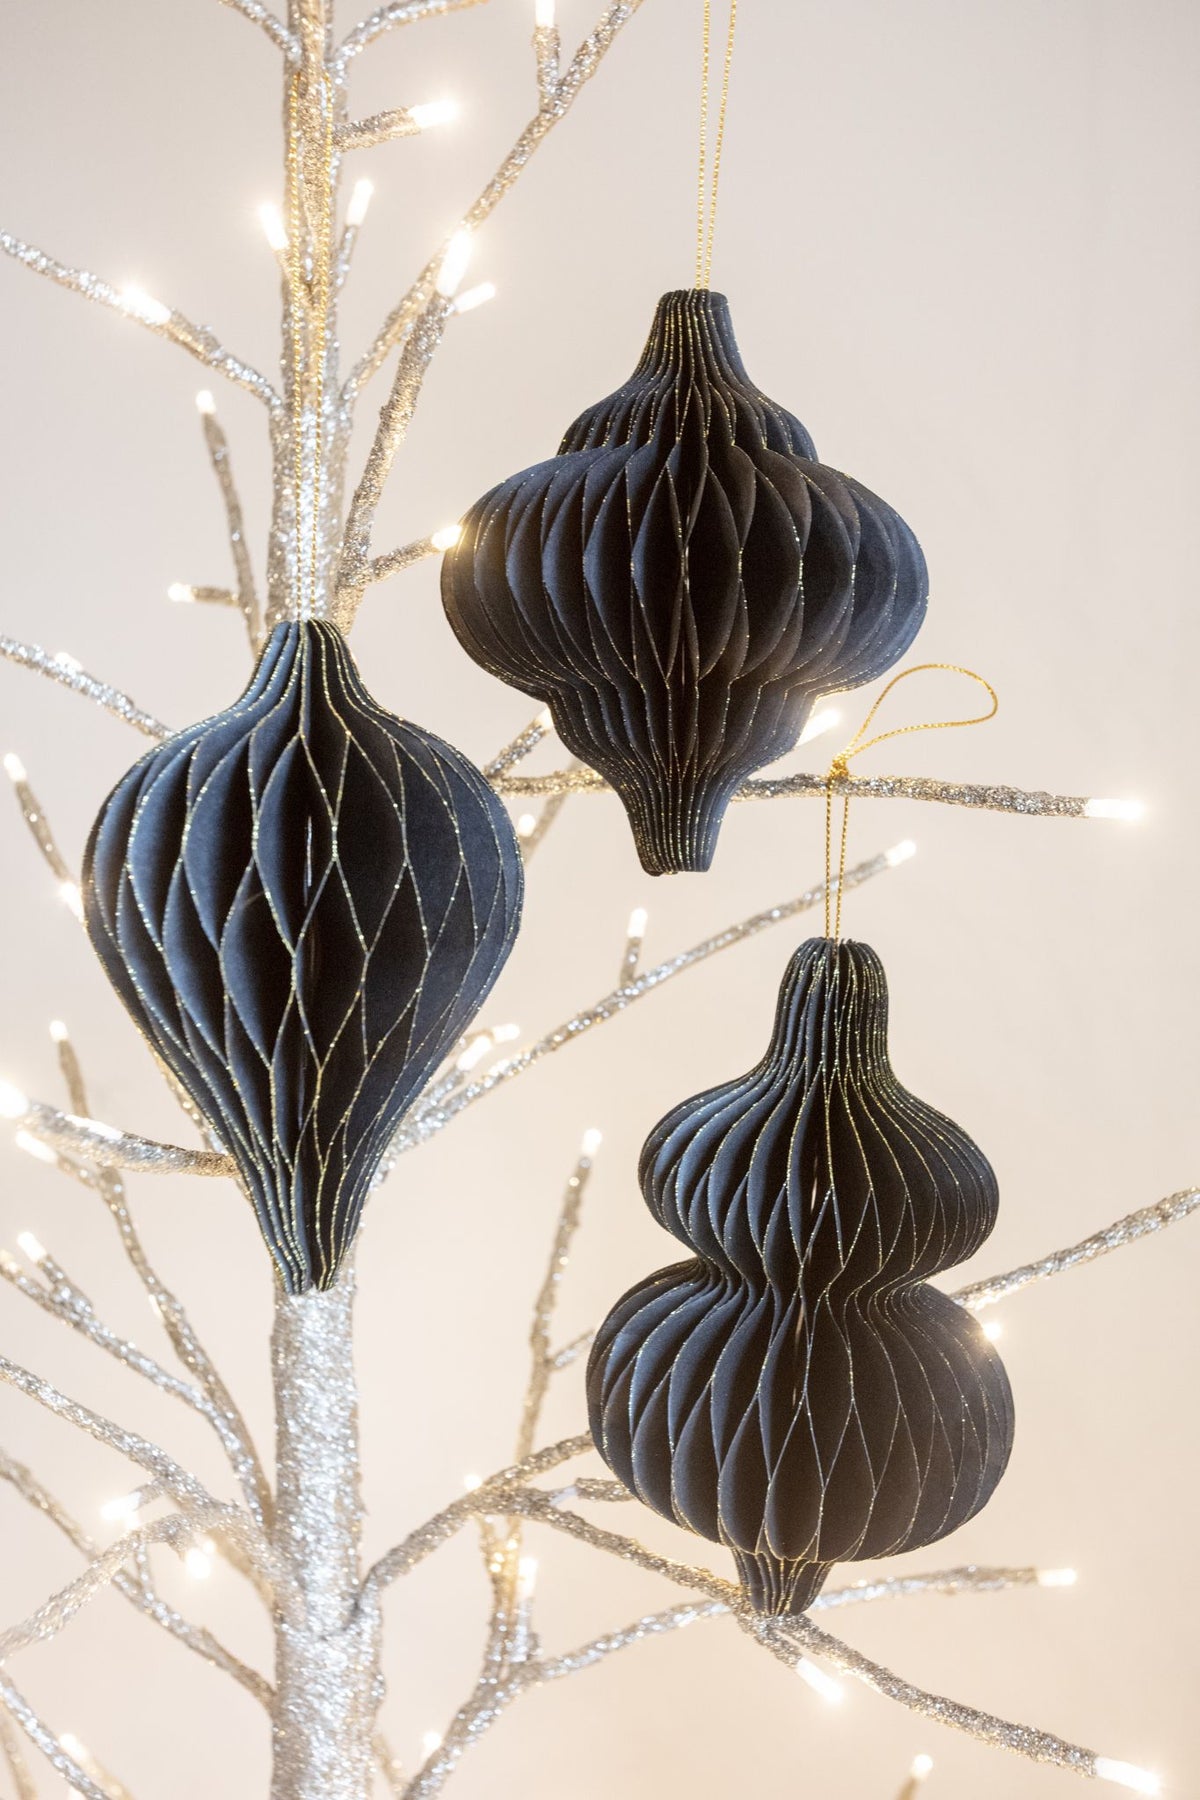 Set of 3 Black and Gold Hanging Paper Decorations.